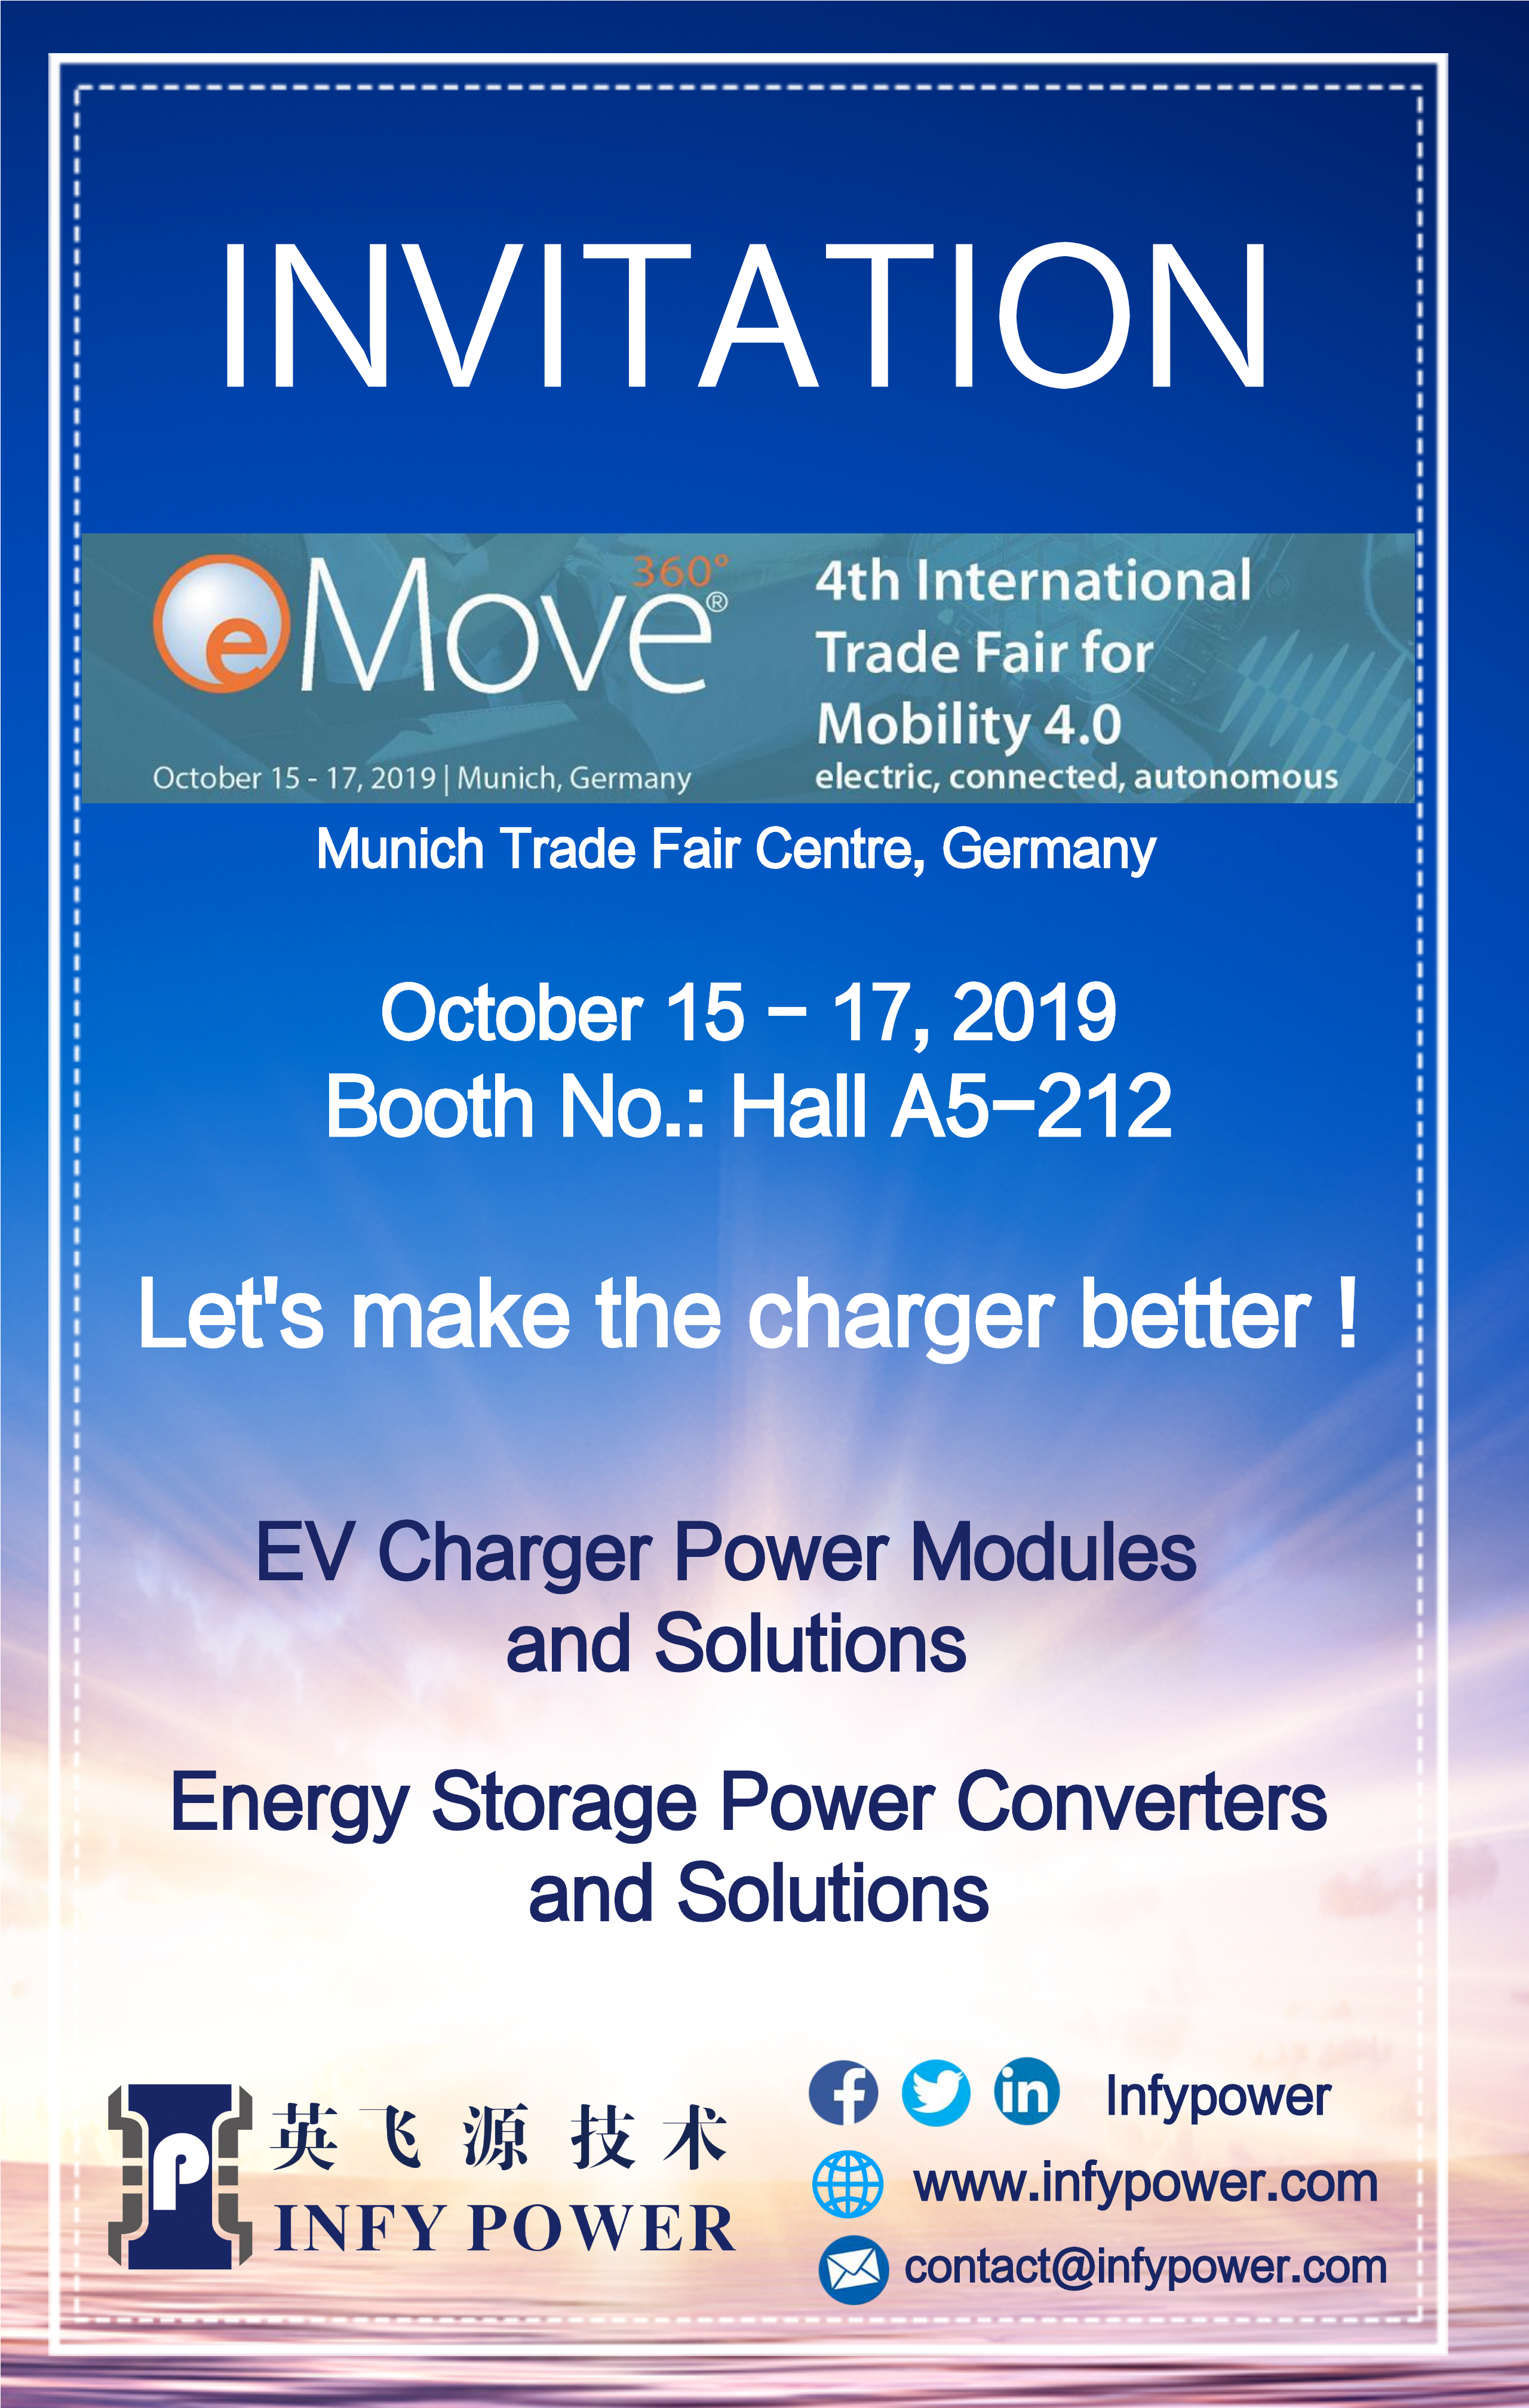 Infypower sincerely invite you to visit our booth in eMove 360 Europe 2019